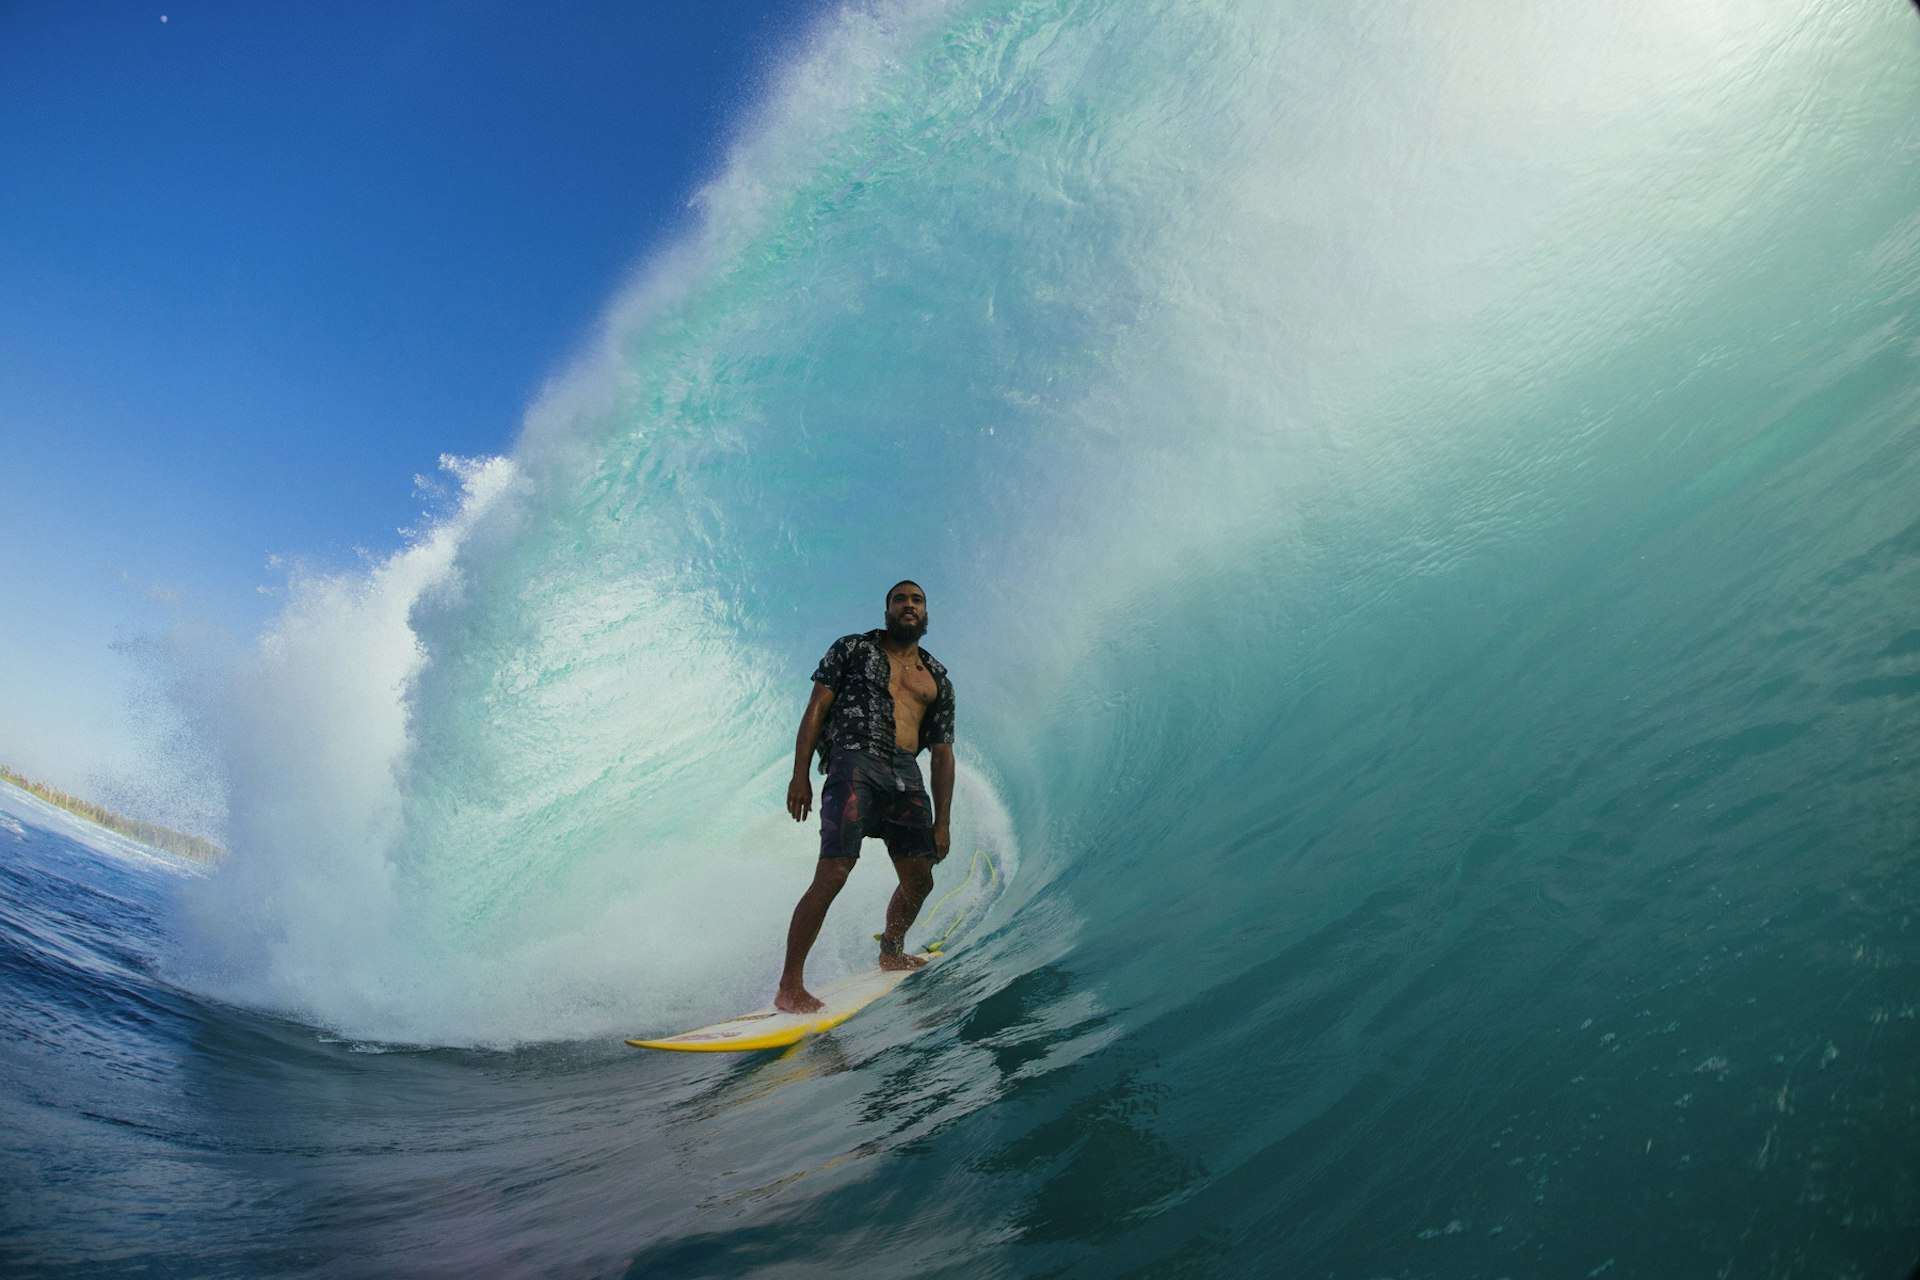 The surf photographer chasing perfect images of chaos